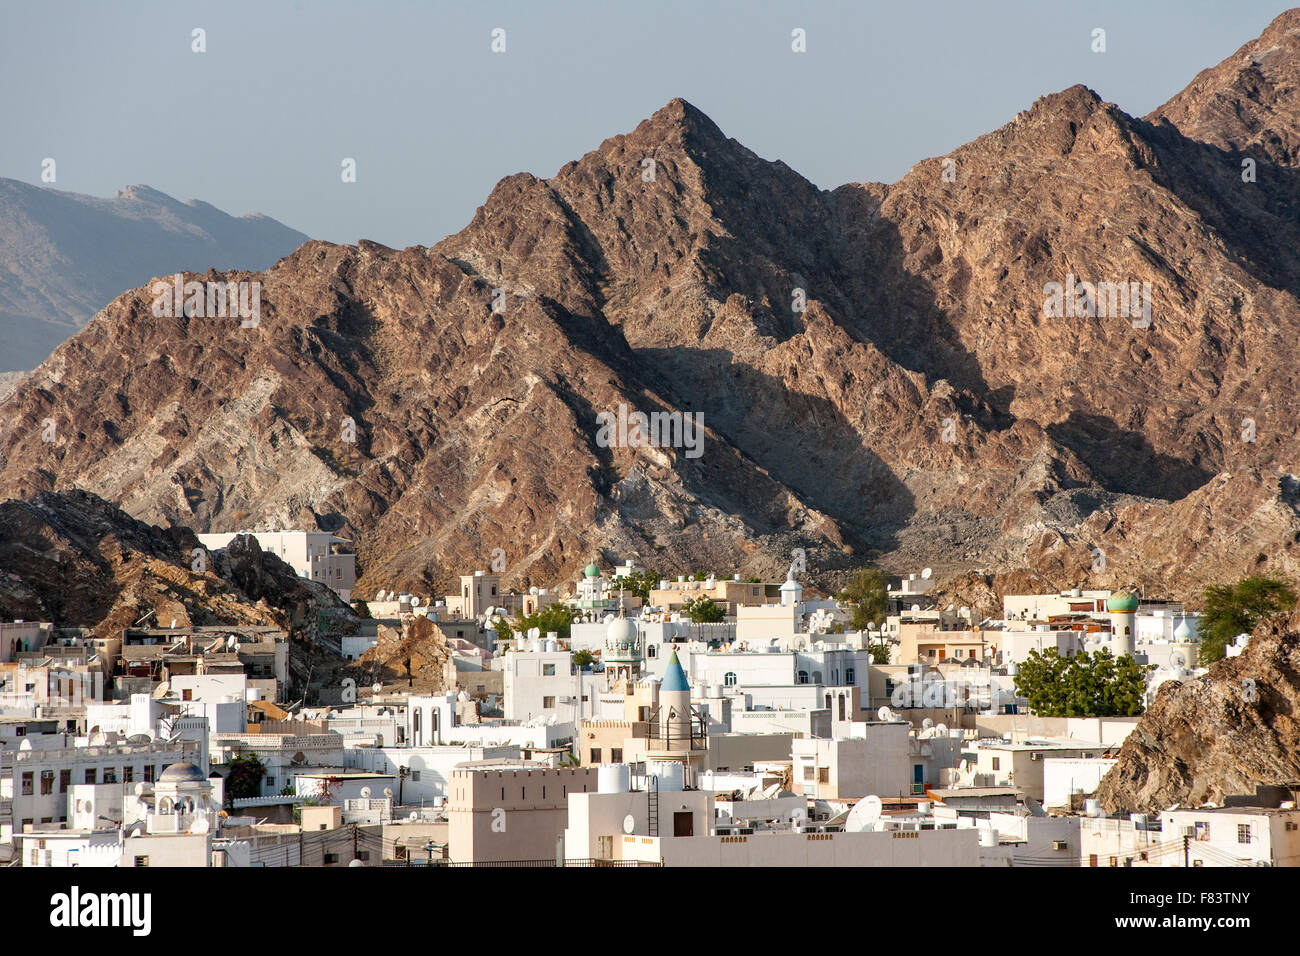 Houses and surrounding mountains in the district of Mutrah in Muscat, the capital of the Sultanate of Oman. Stock Photo